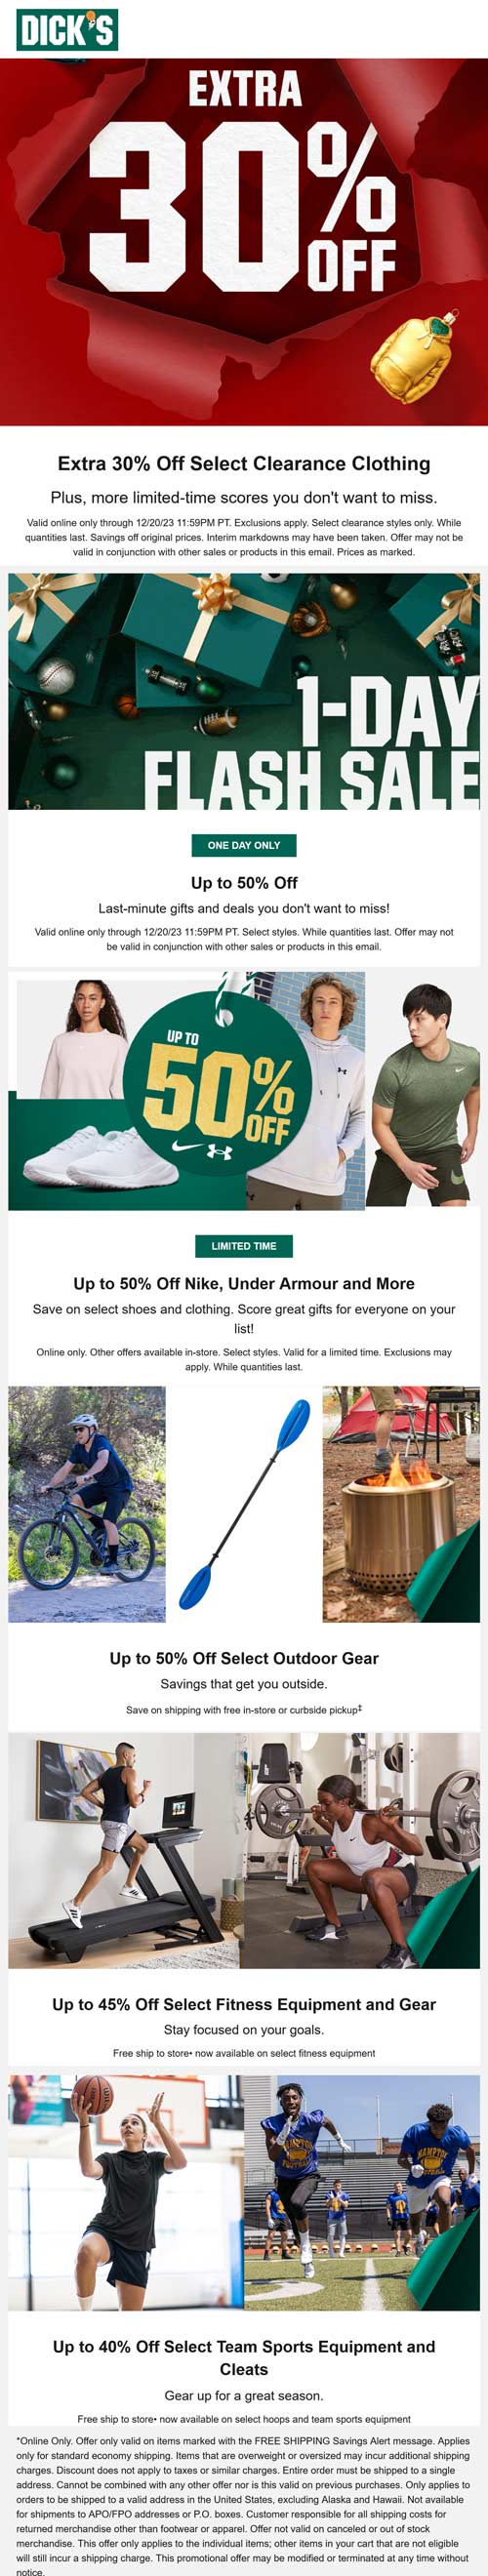 Extra 30% off clearance apparel & more today at Dicks sporting goods #dicks